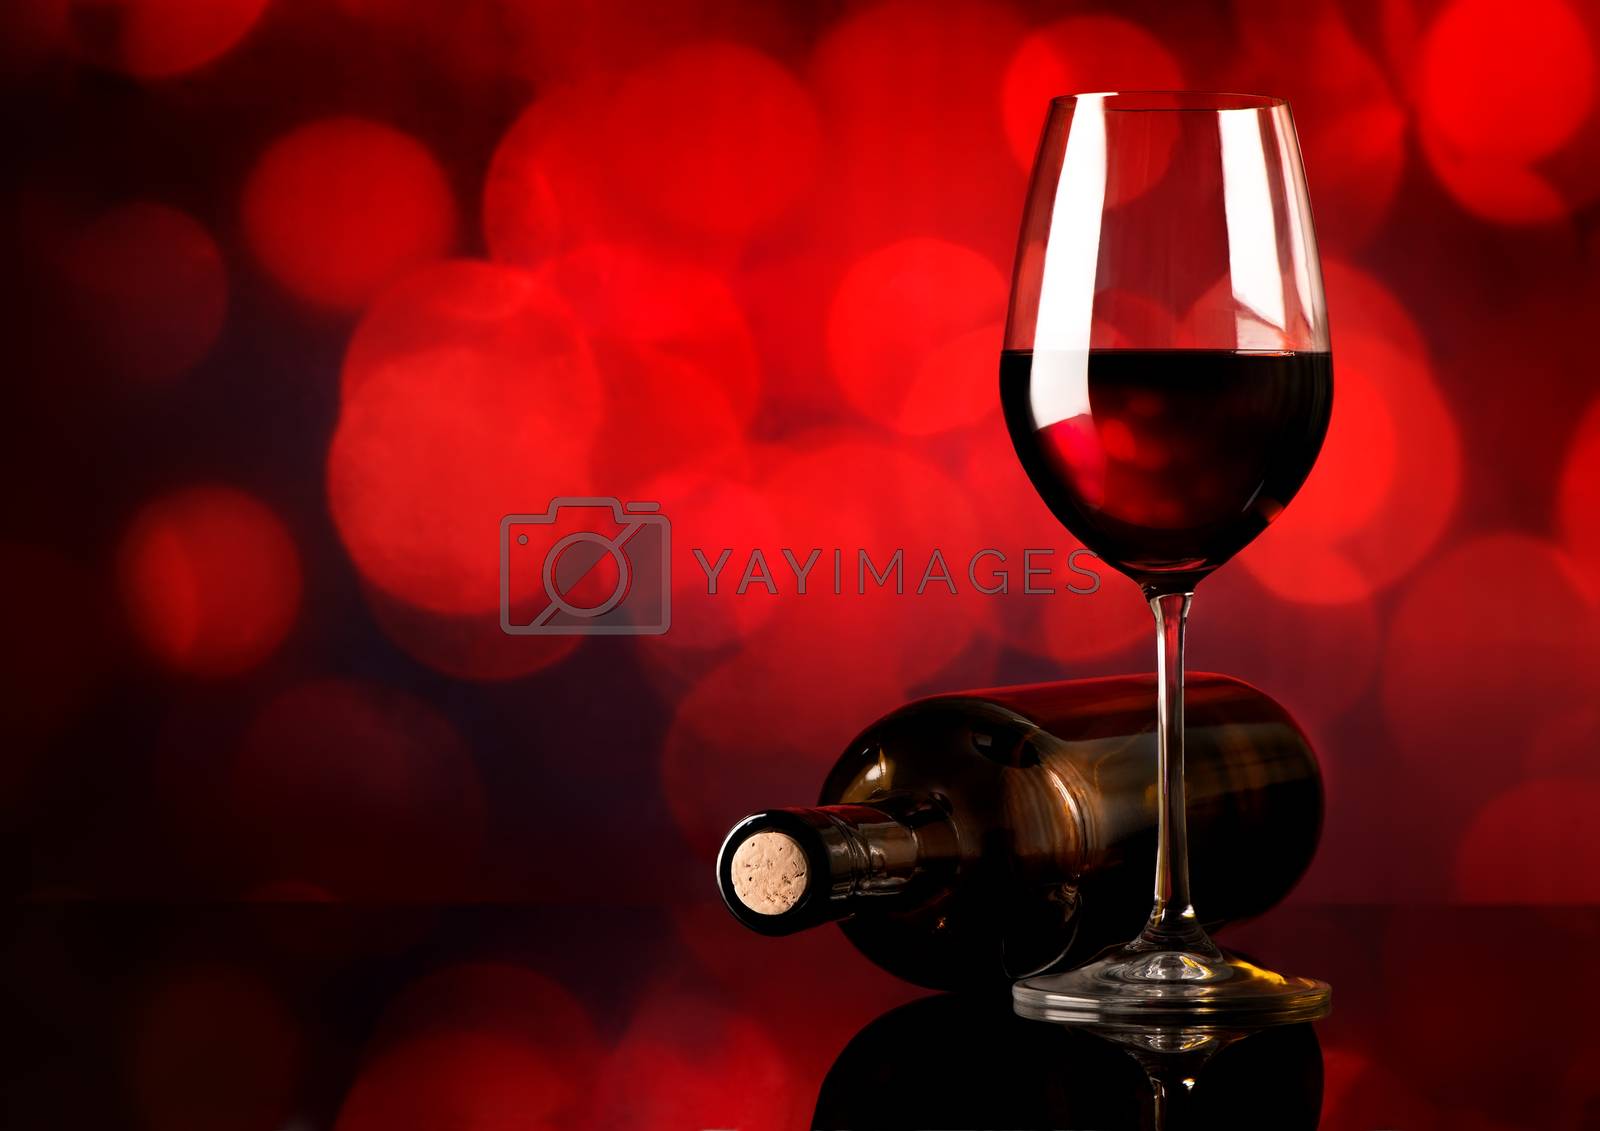 Royalty free image of Red wine on red background by Givaga